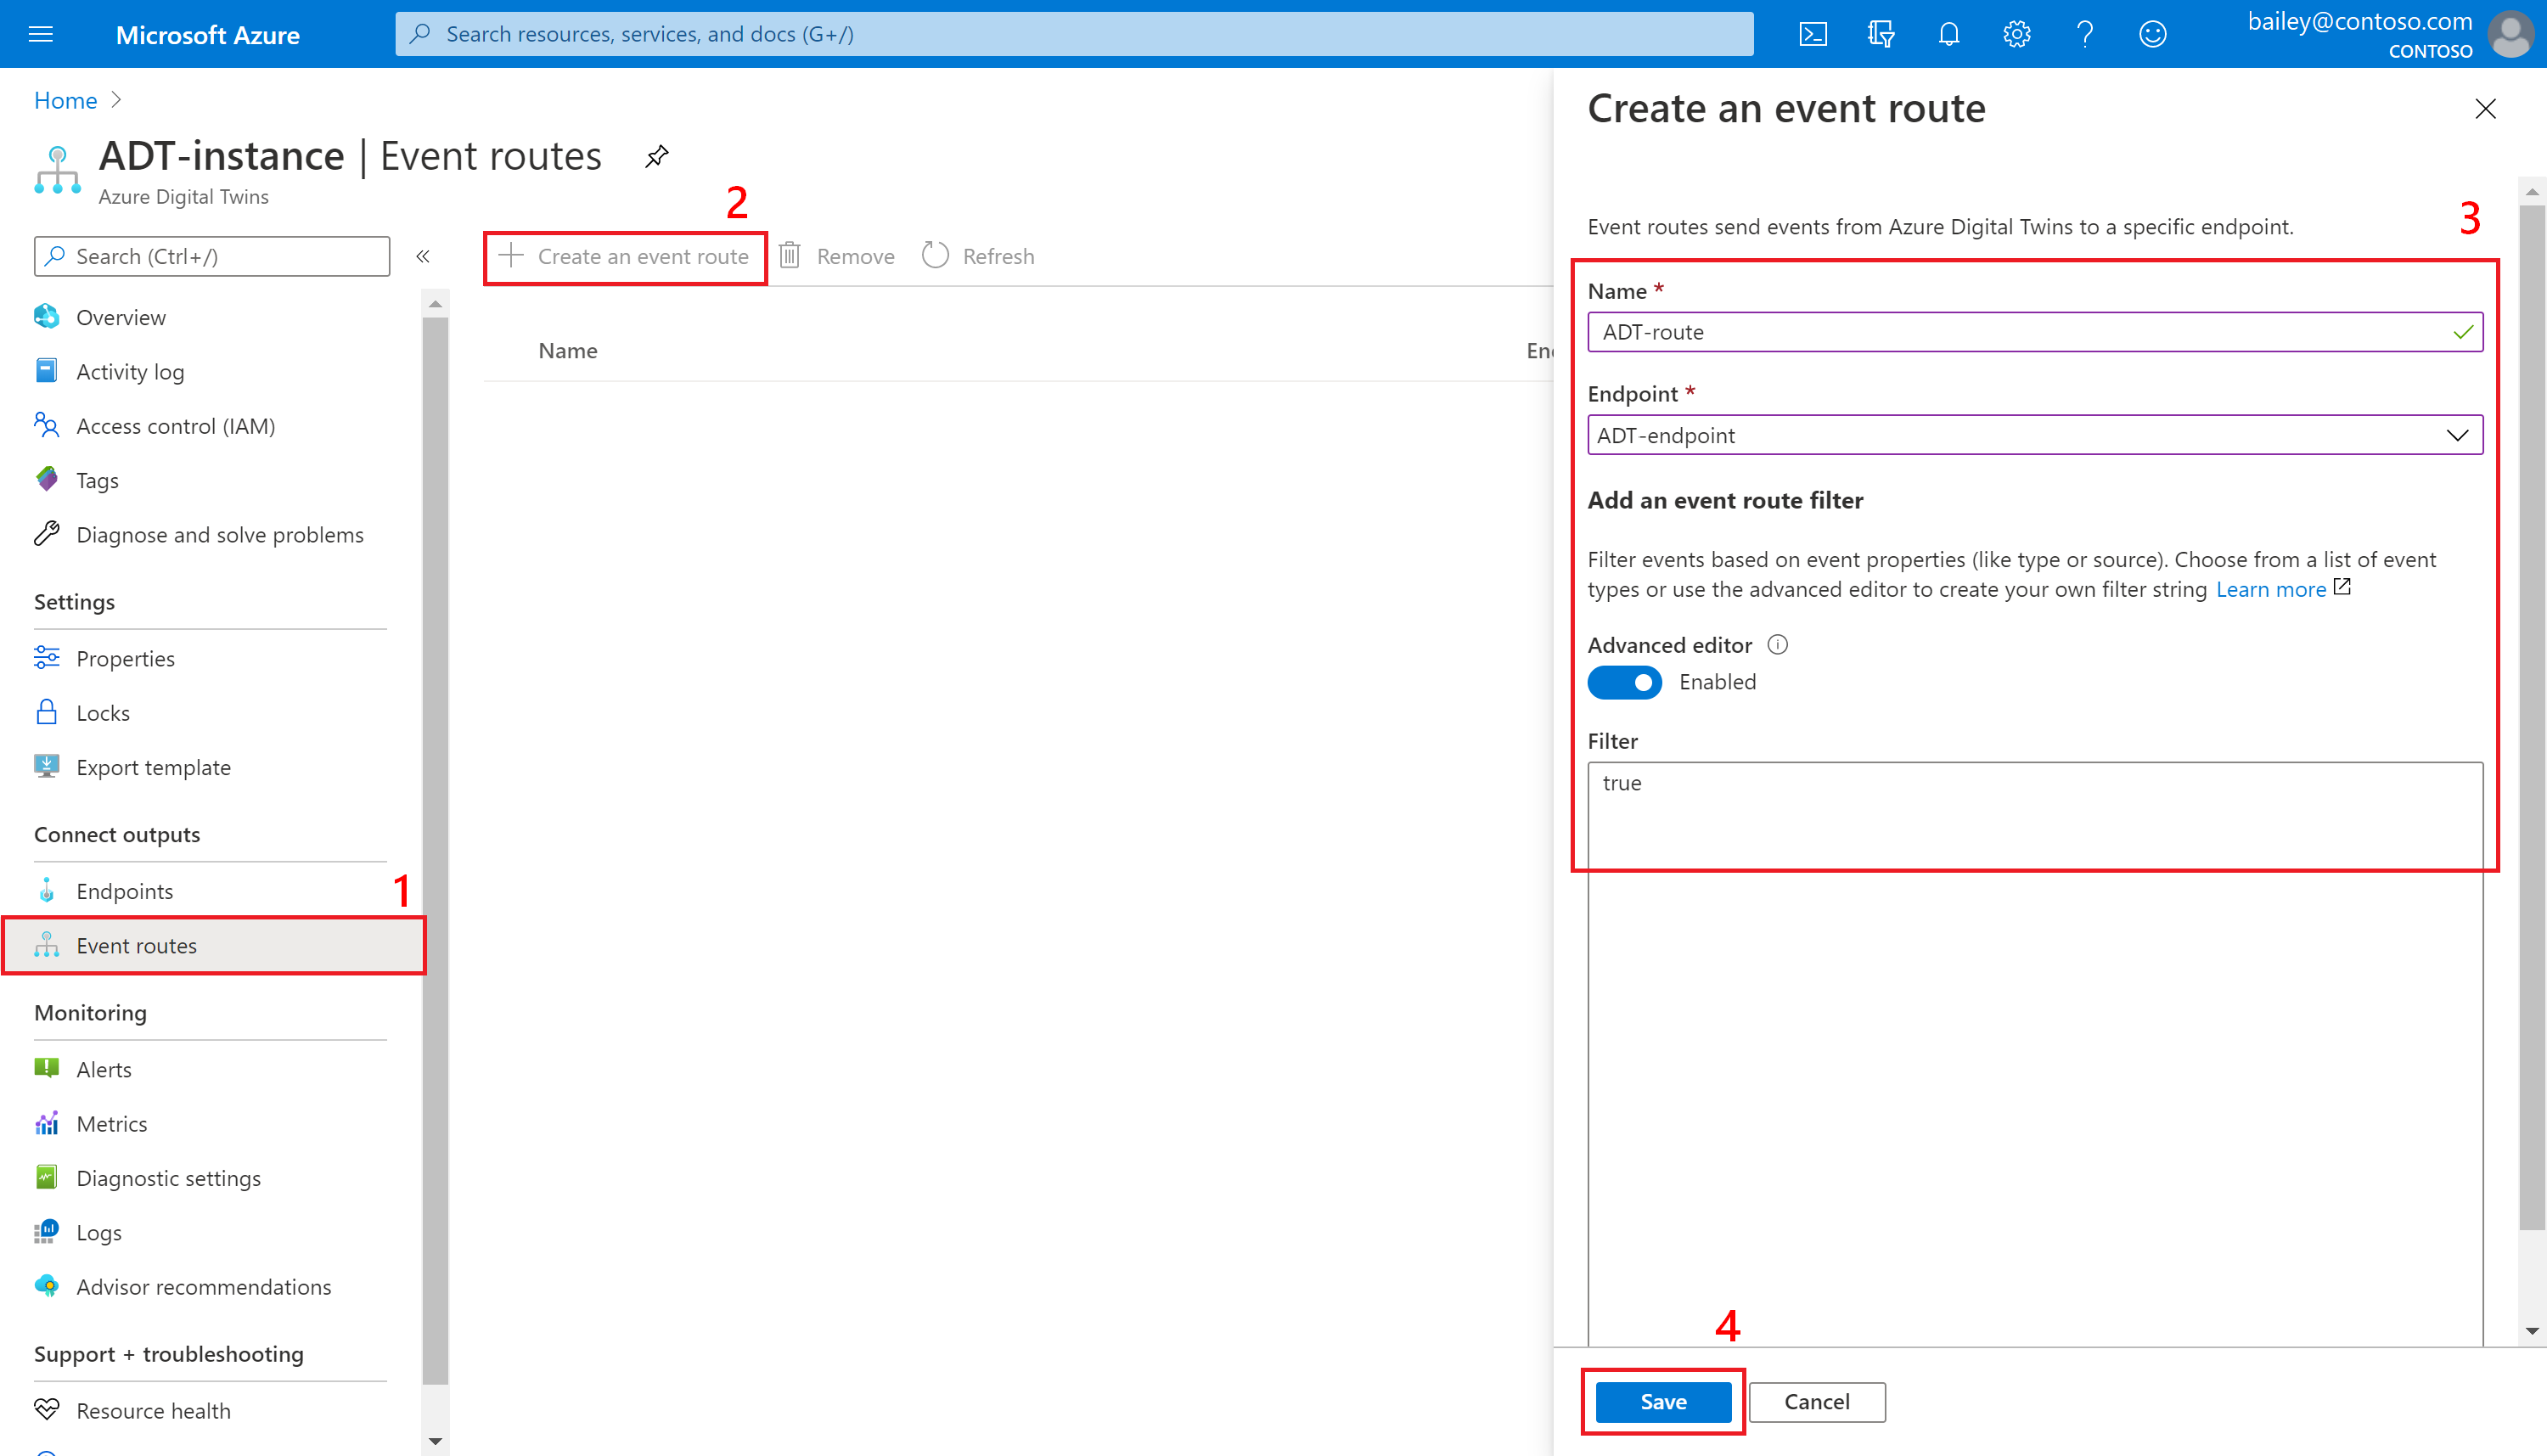 Screenshot of creating an event route for your instance in the Azure portal.